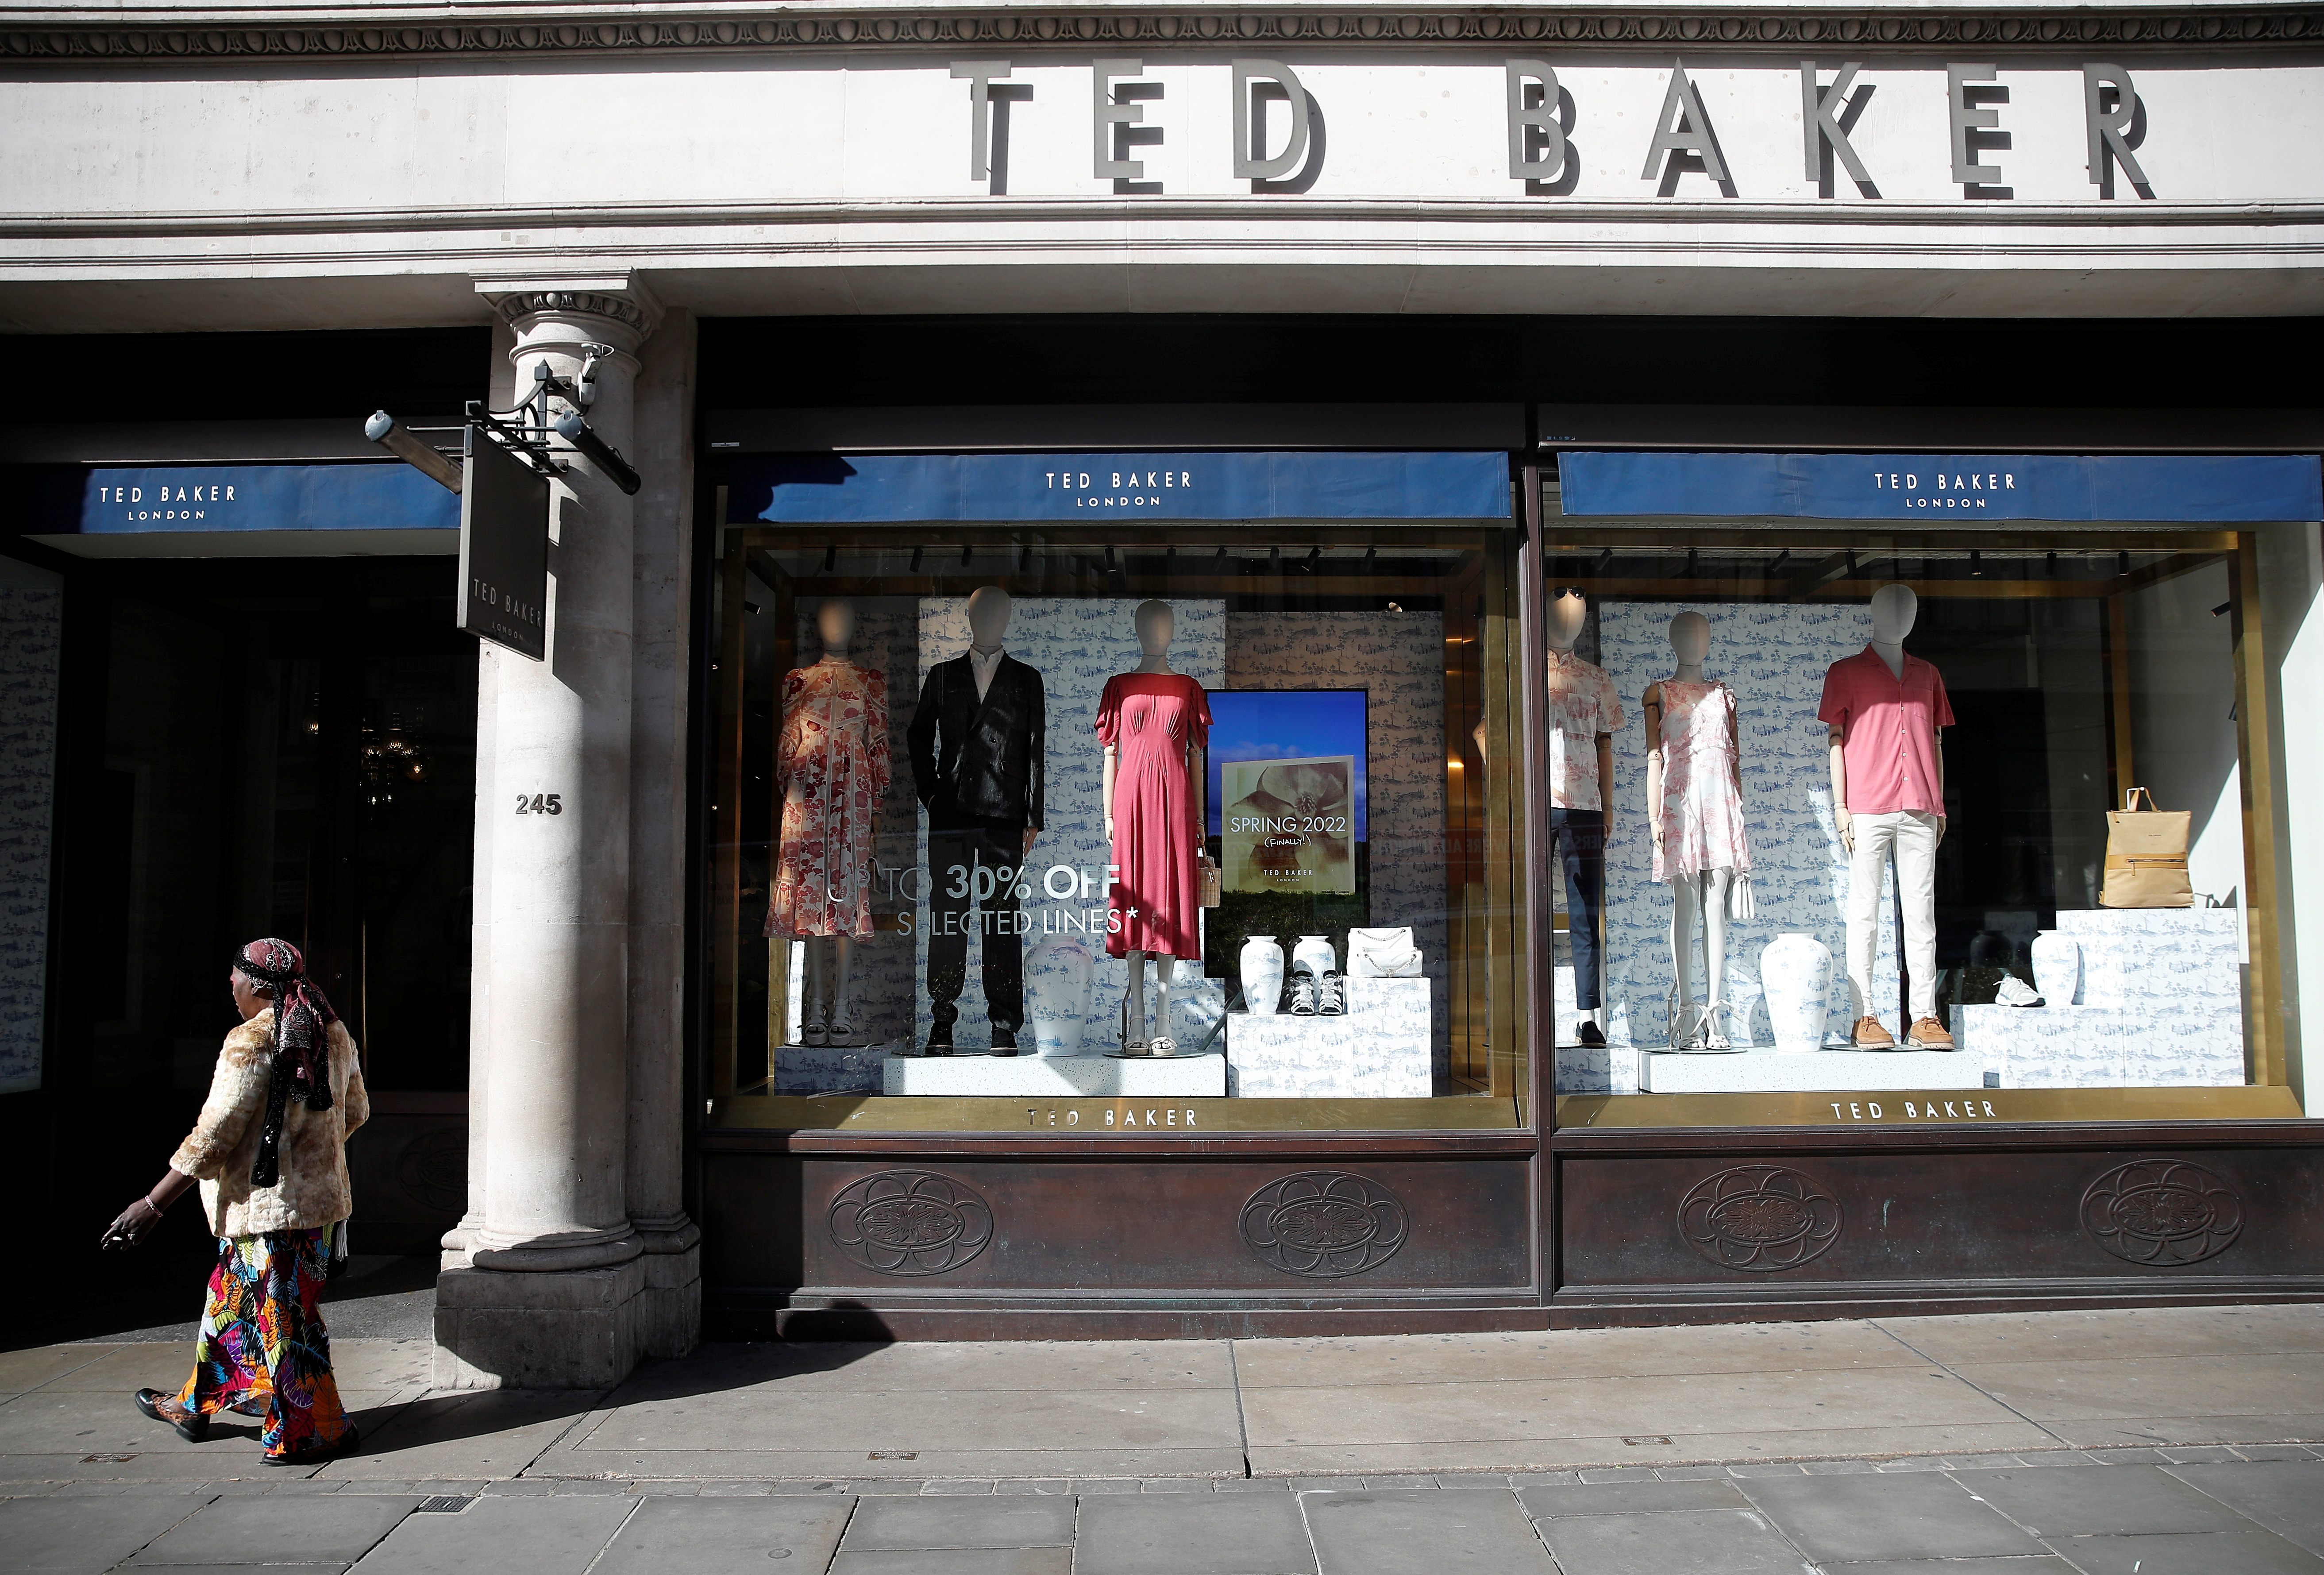 Ted Baker's store revenue gains on recovering footfall, formalwear